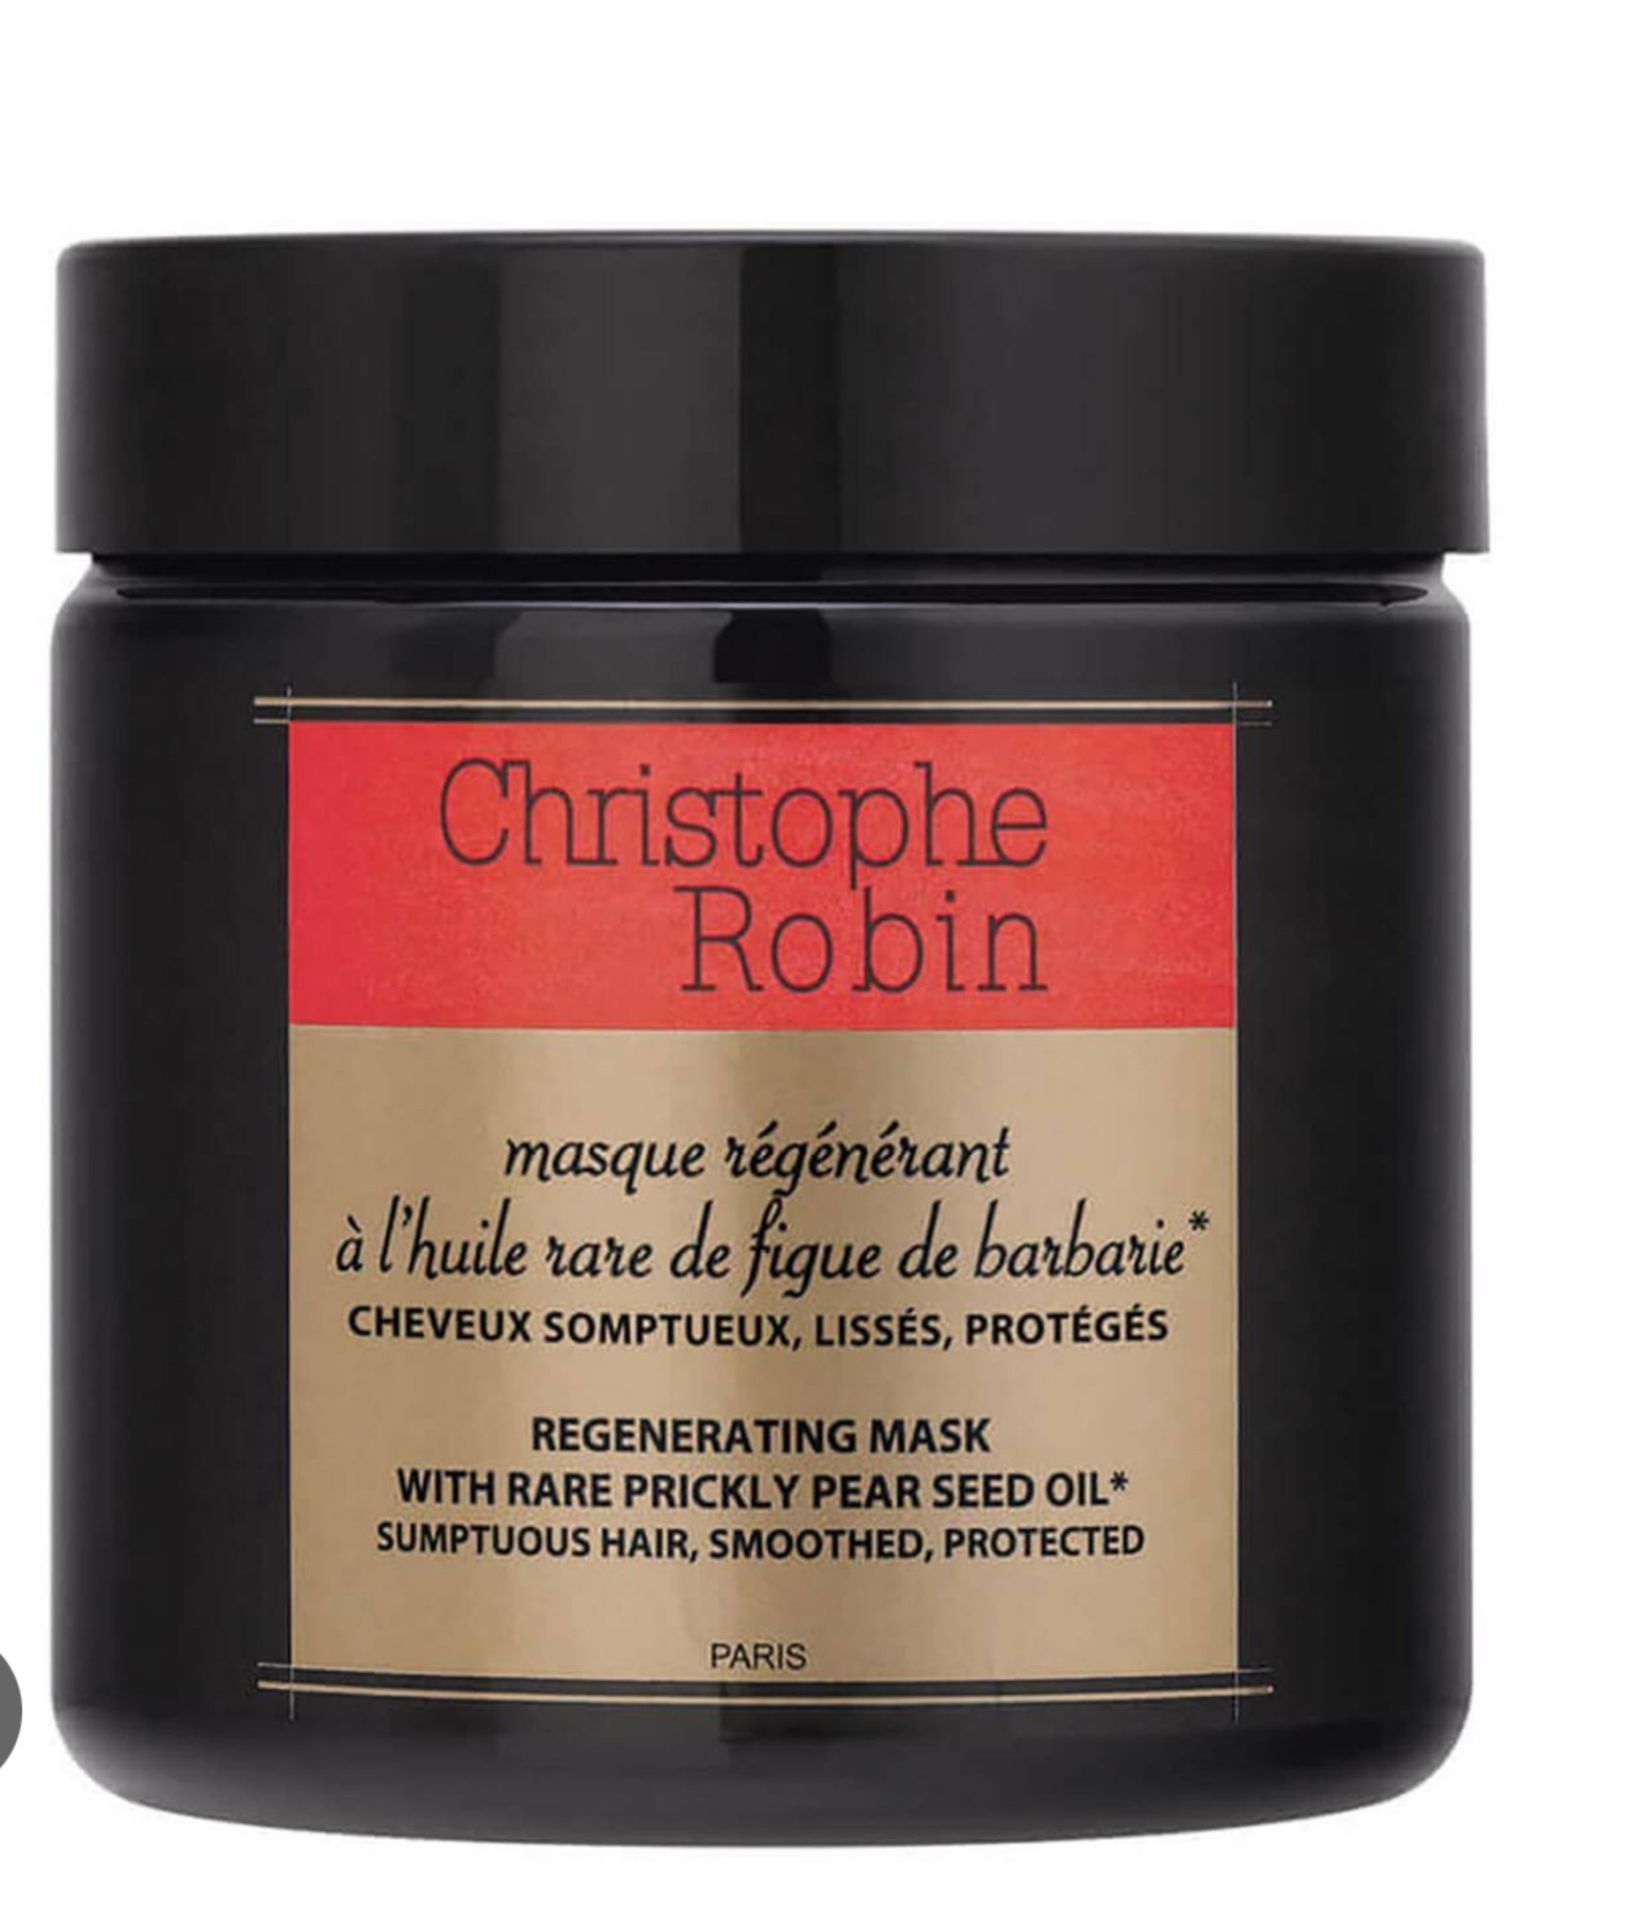 1100 X CHRISTOPHE ROBIN REGENERATING MASK WITH RARE PRICKLY PEAR OIL 12ML RRP£2750